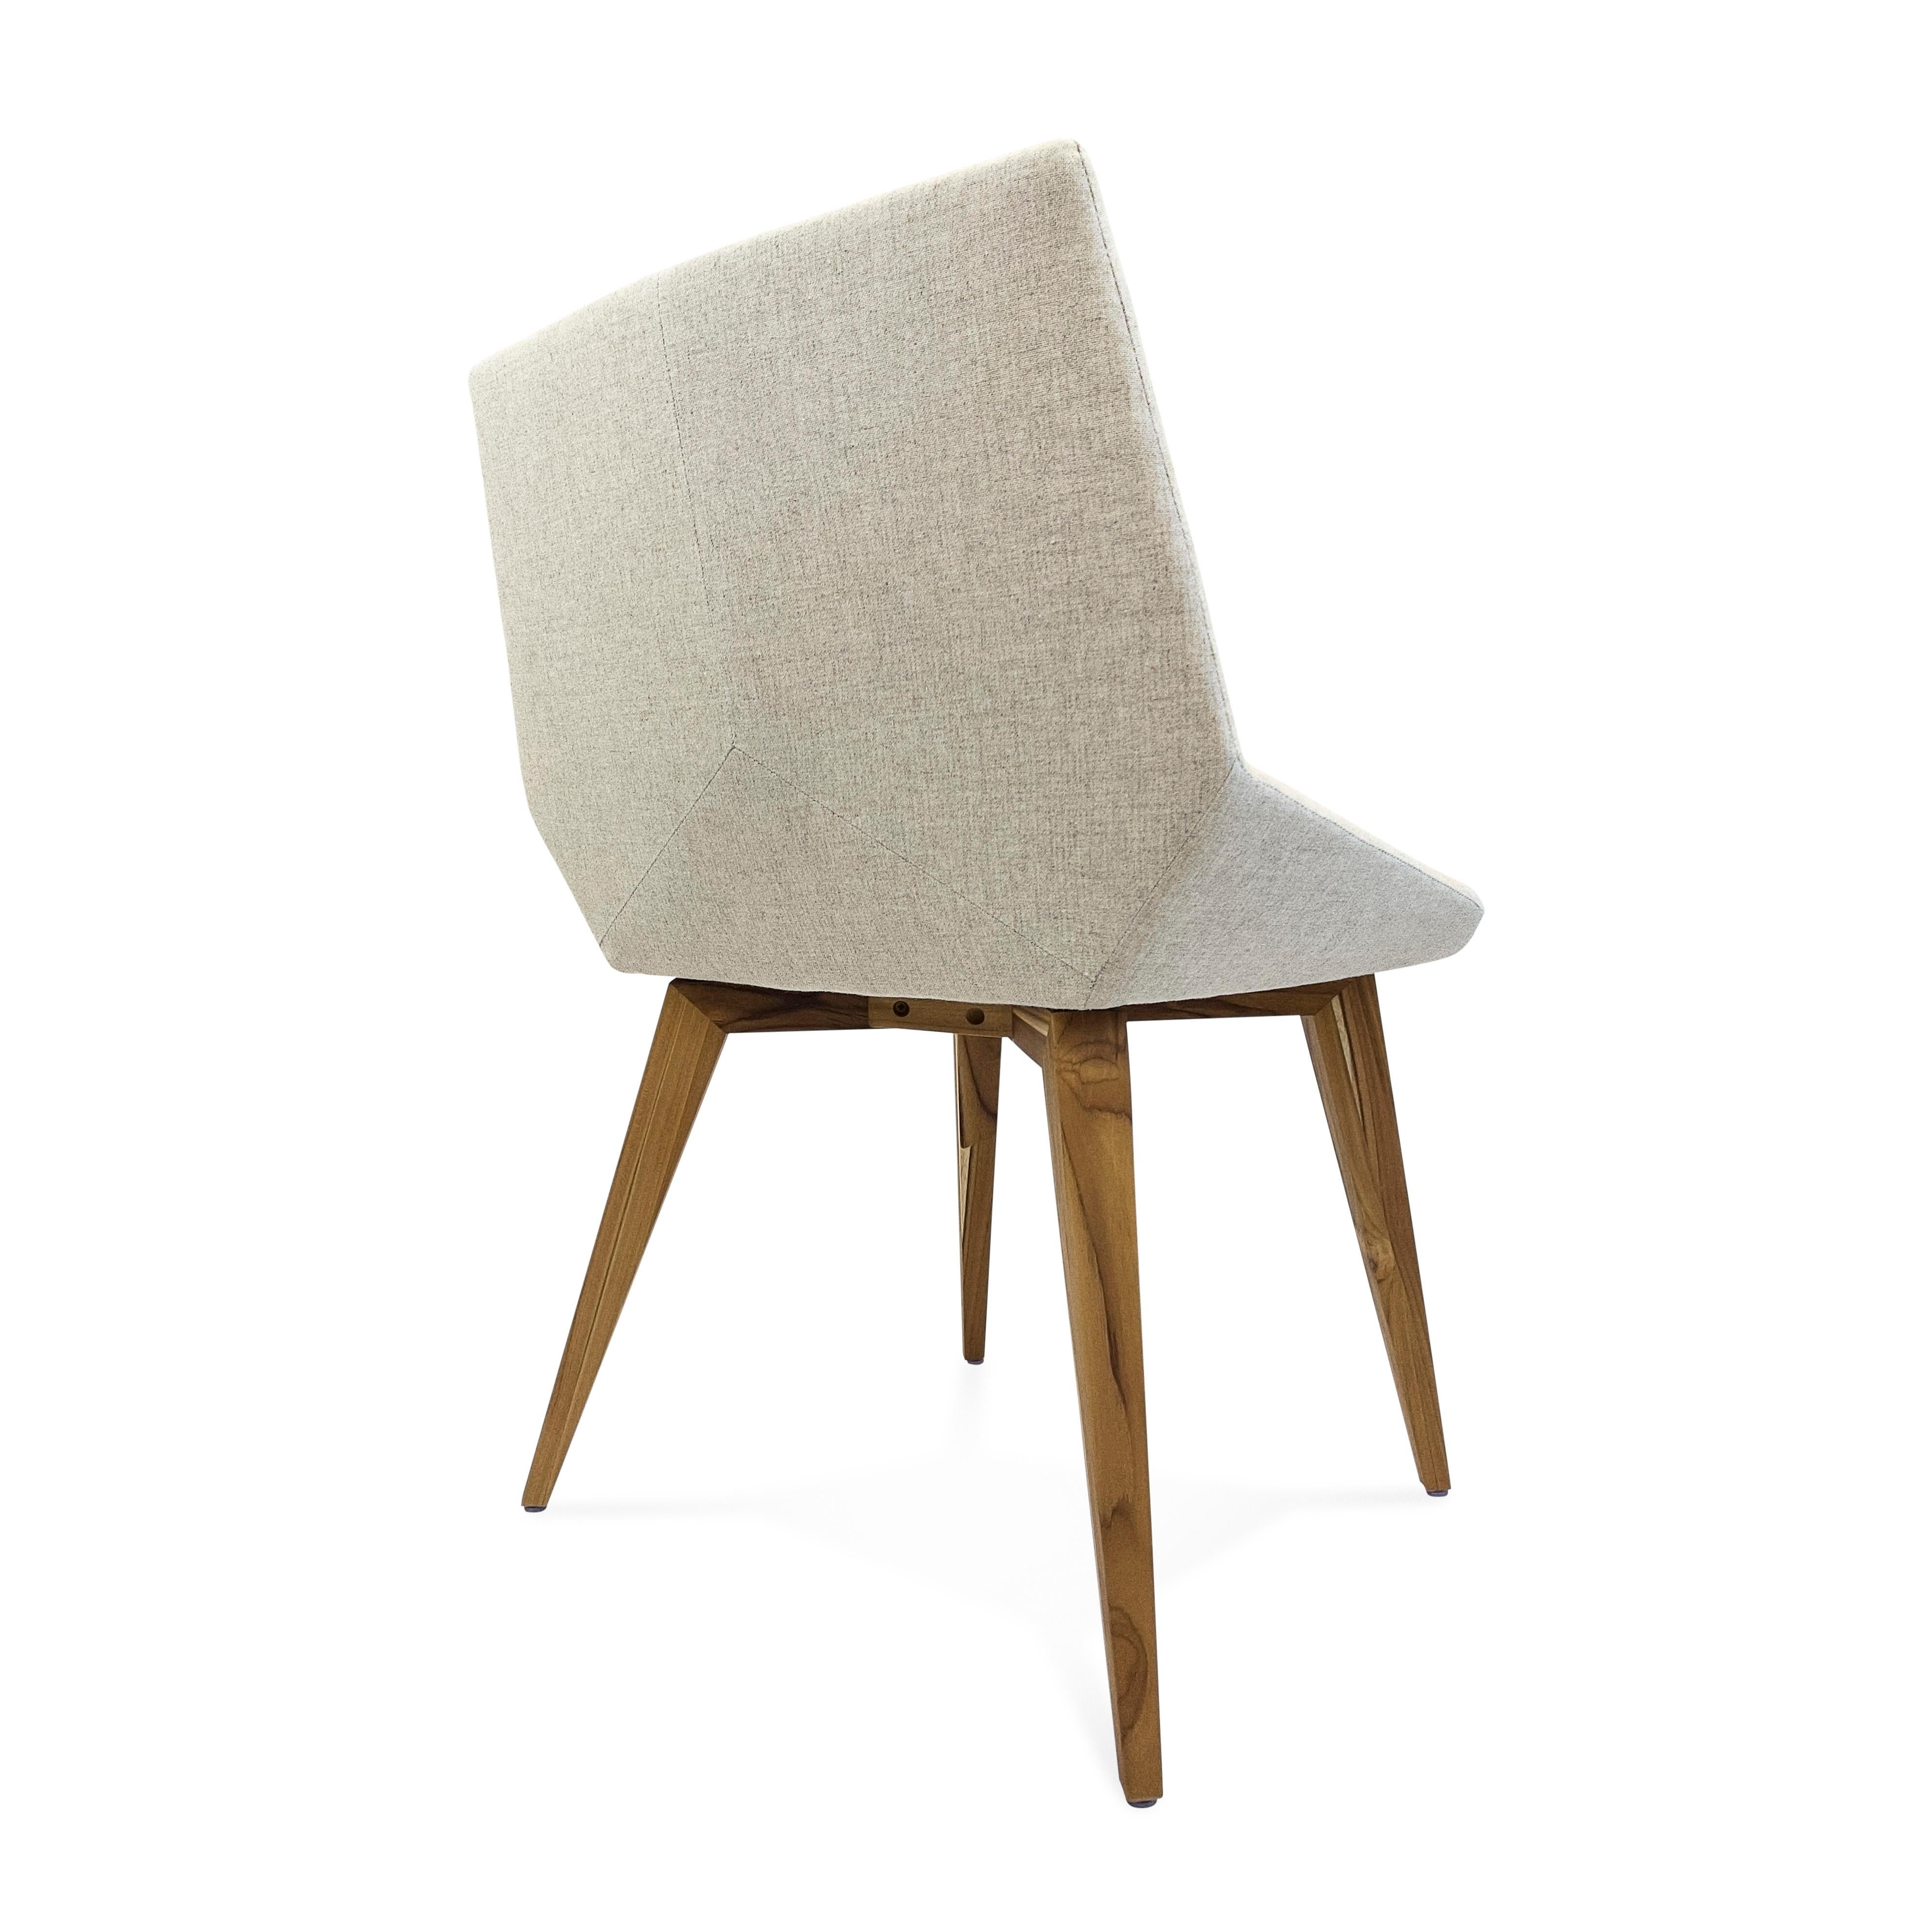 Geometric Cubi Dining Chair with Teak Wood Finish Base and Ivory Fabric  In New Condition For Sale In Miami, FL